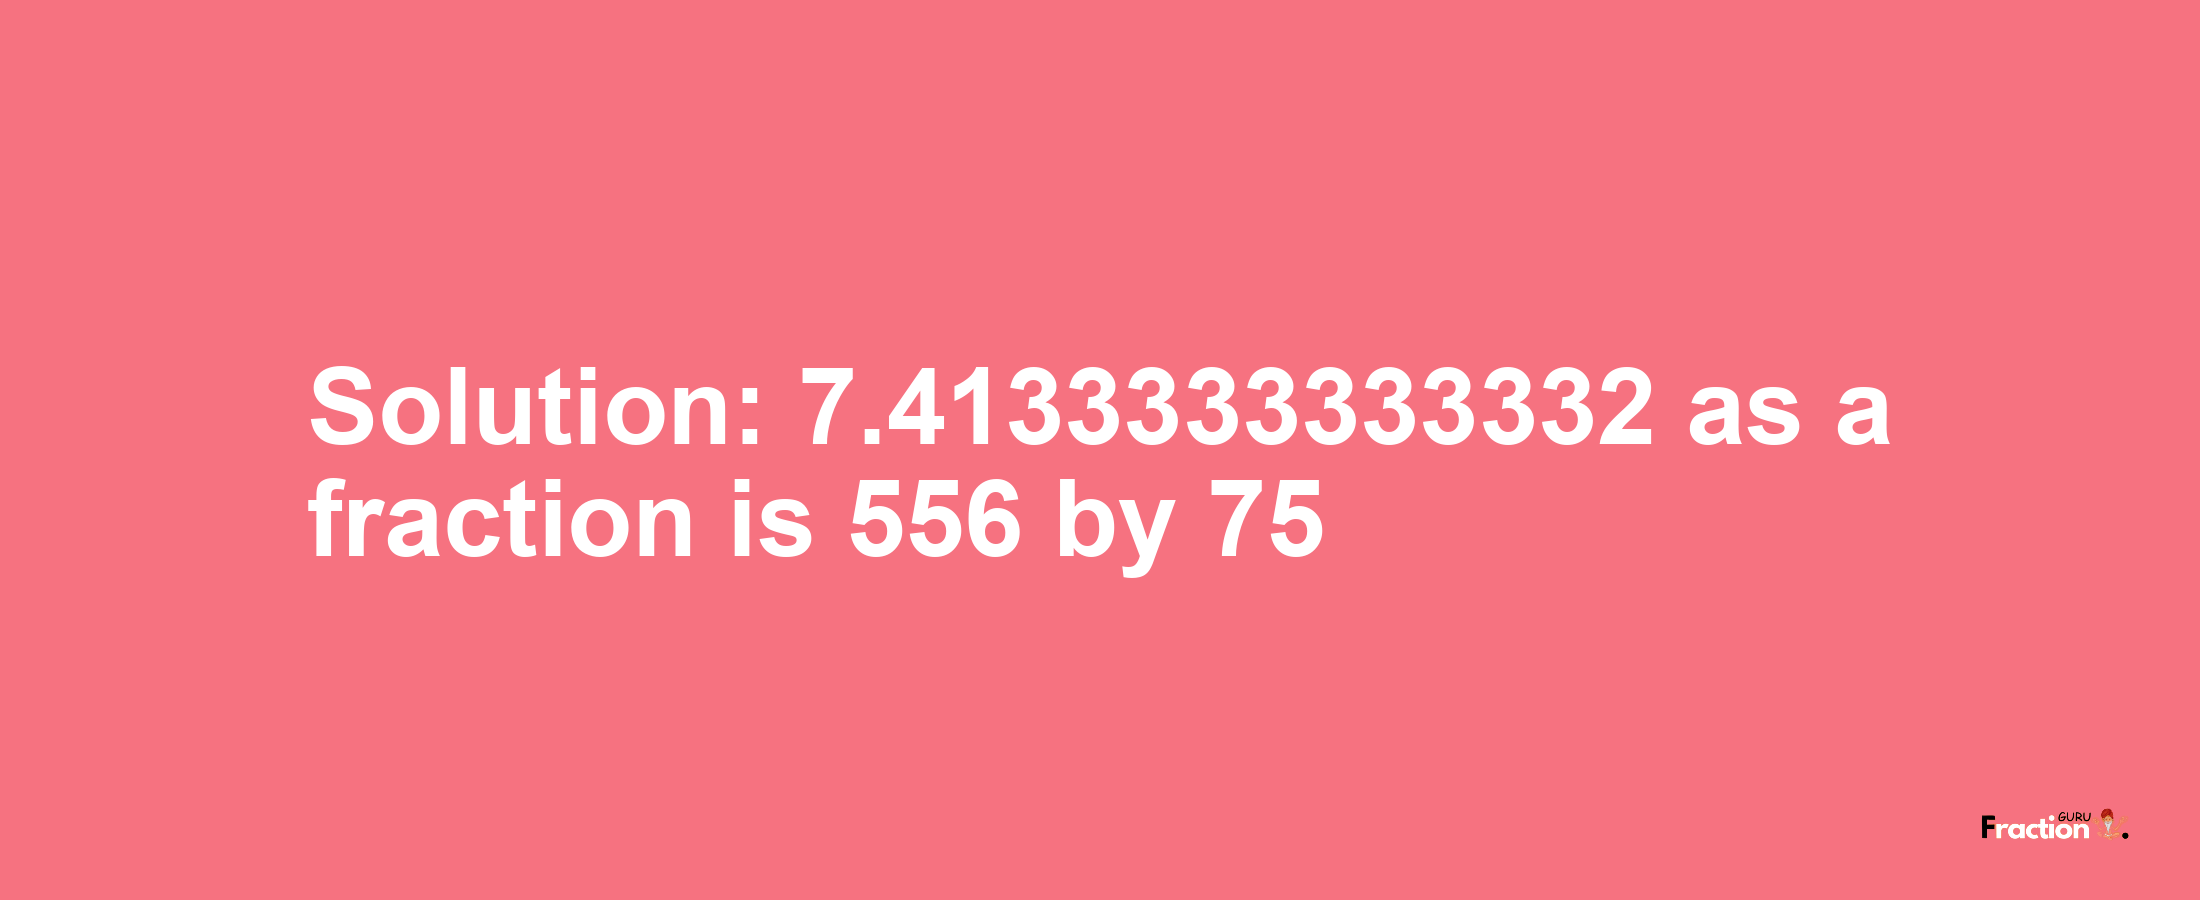 Solution:7.4133333333332 as a fraction is 556/75